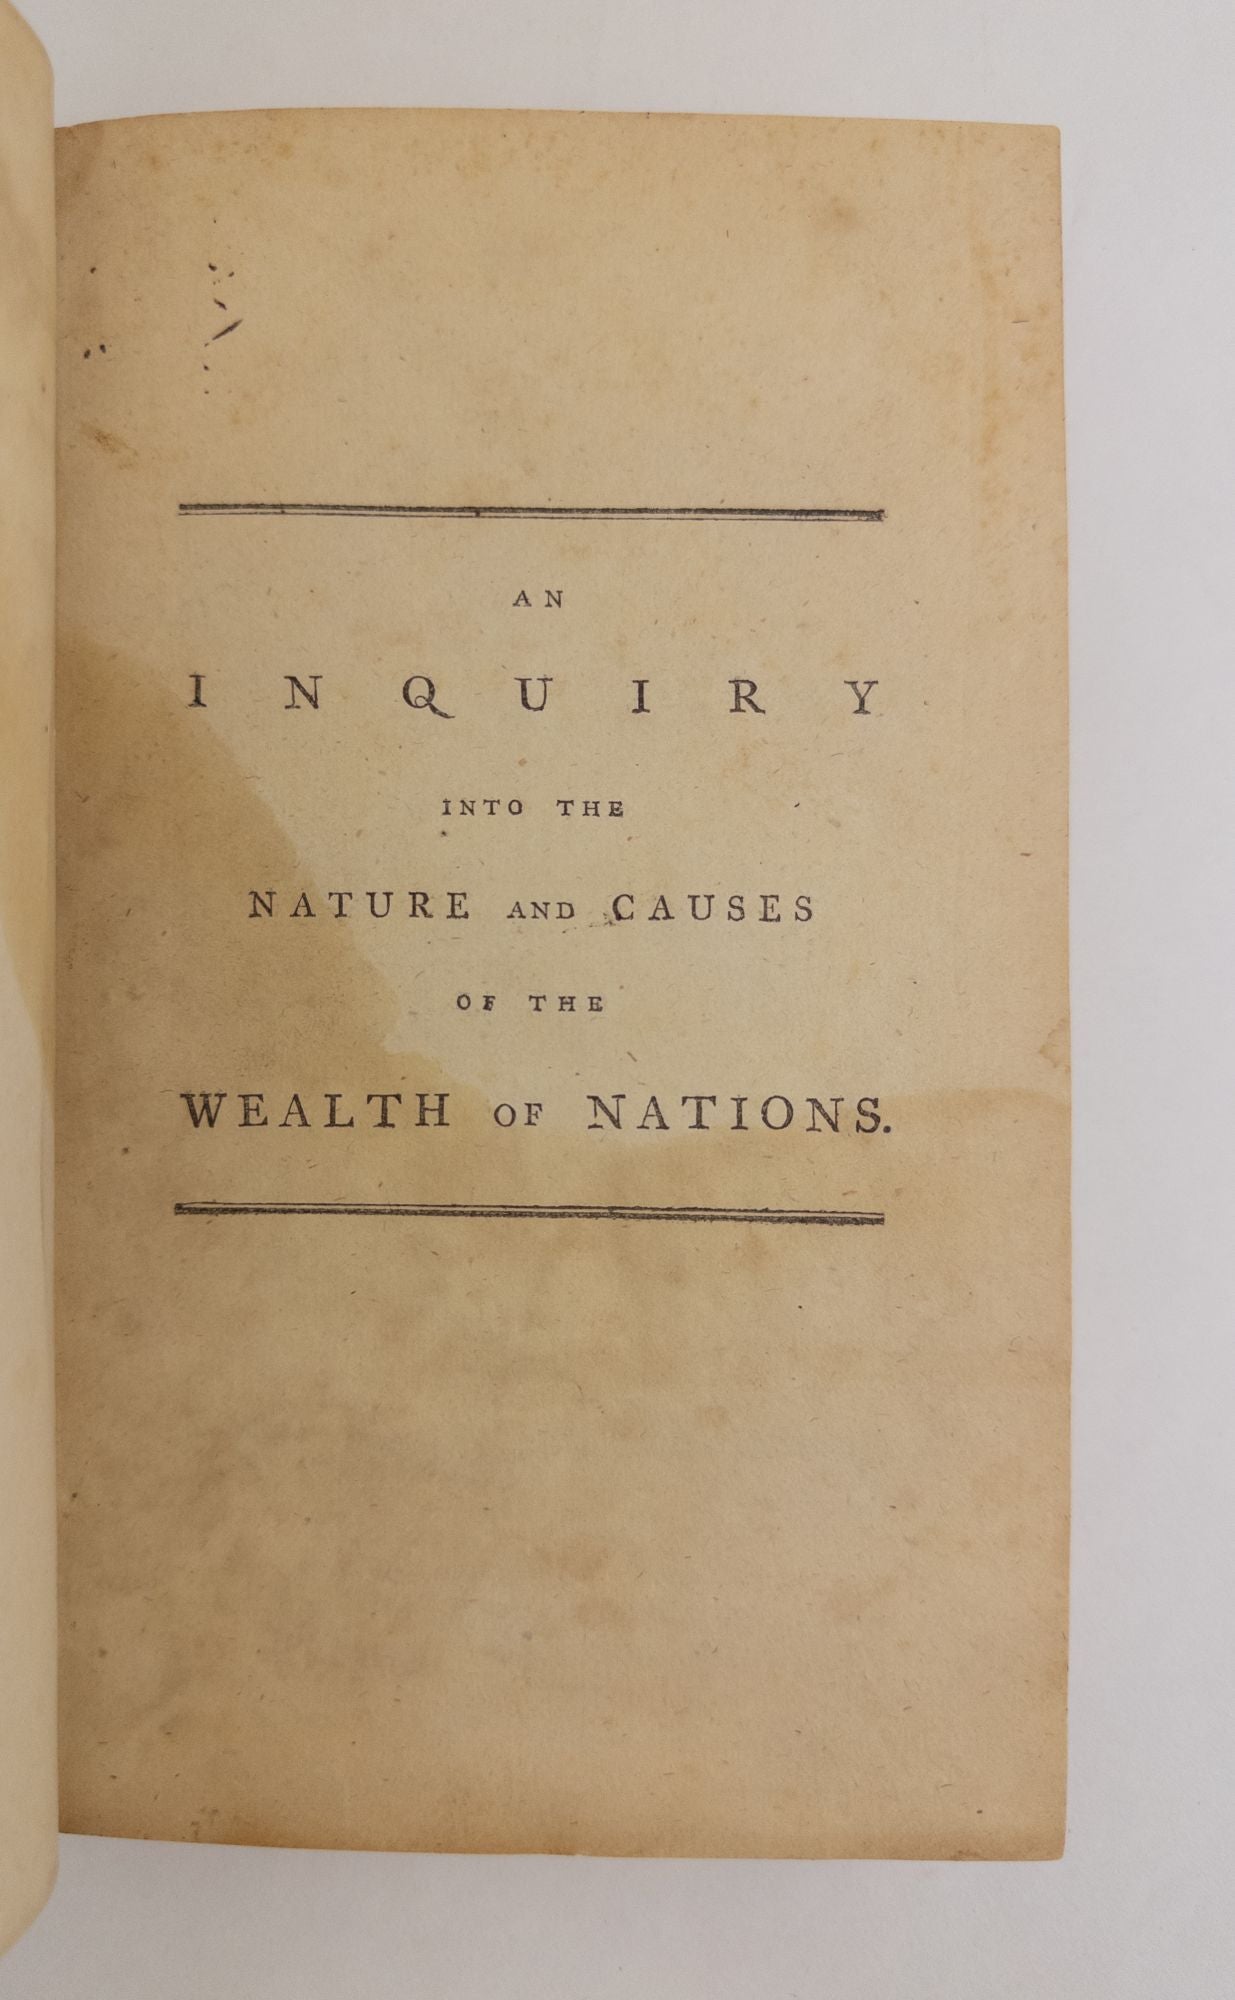 Product Image for AN INQUIRY INTO THE NATURE AND CAUSES OF THE WEALTH OF NATIONS [Two volumes]